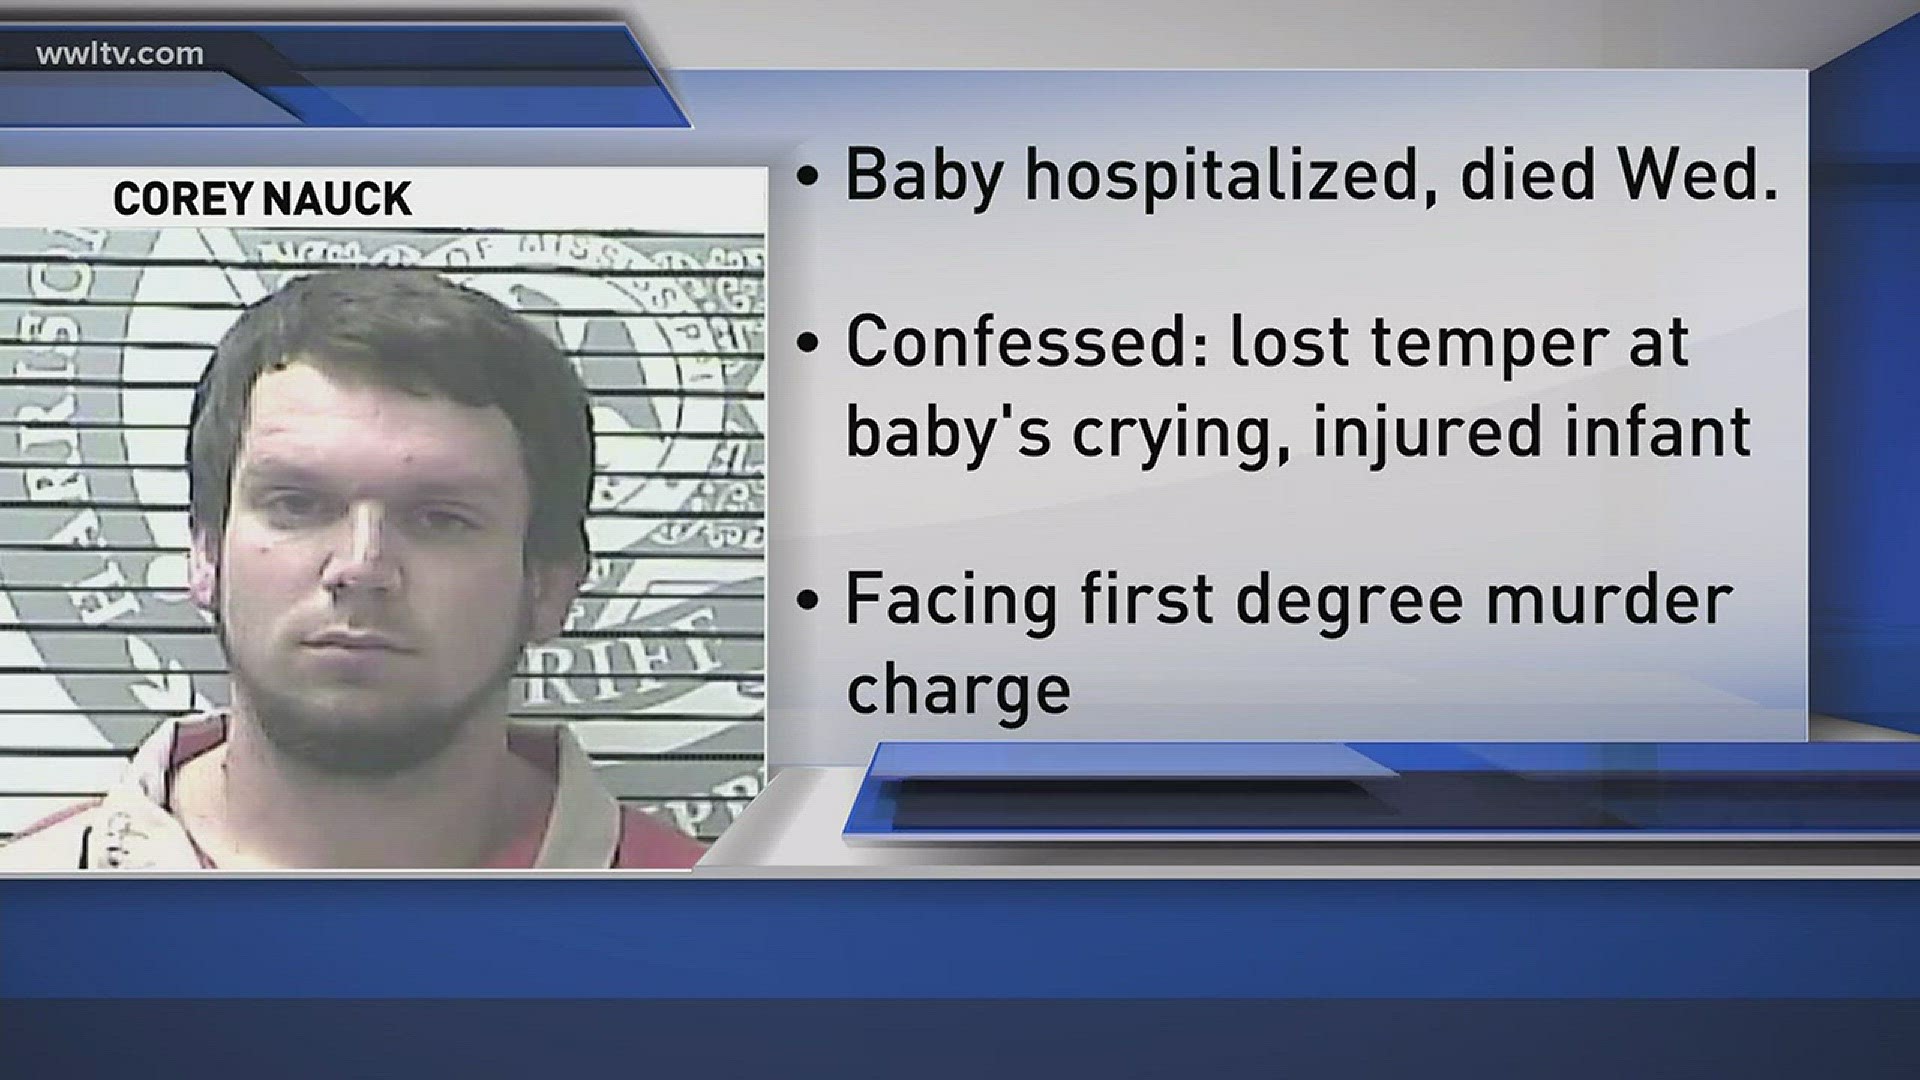 He is arrested Thursday in connection with beating death of 7-month-old son